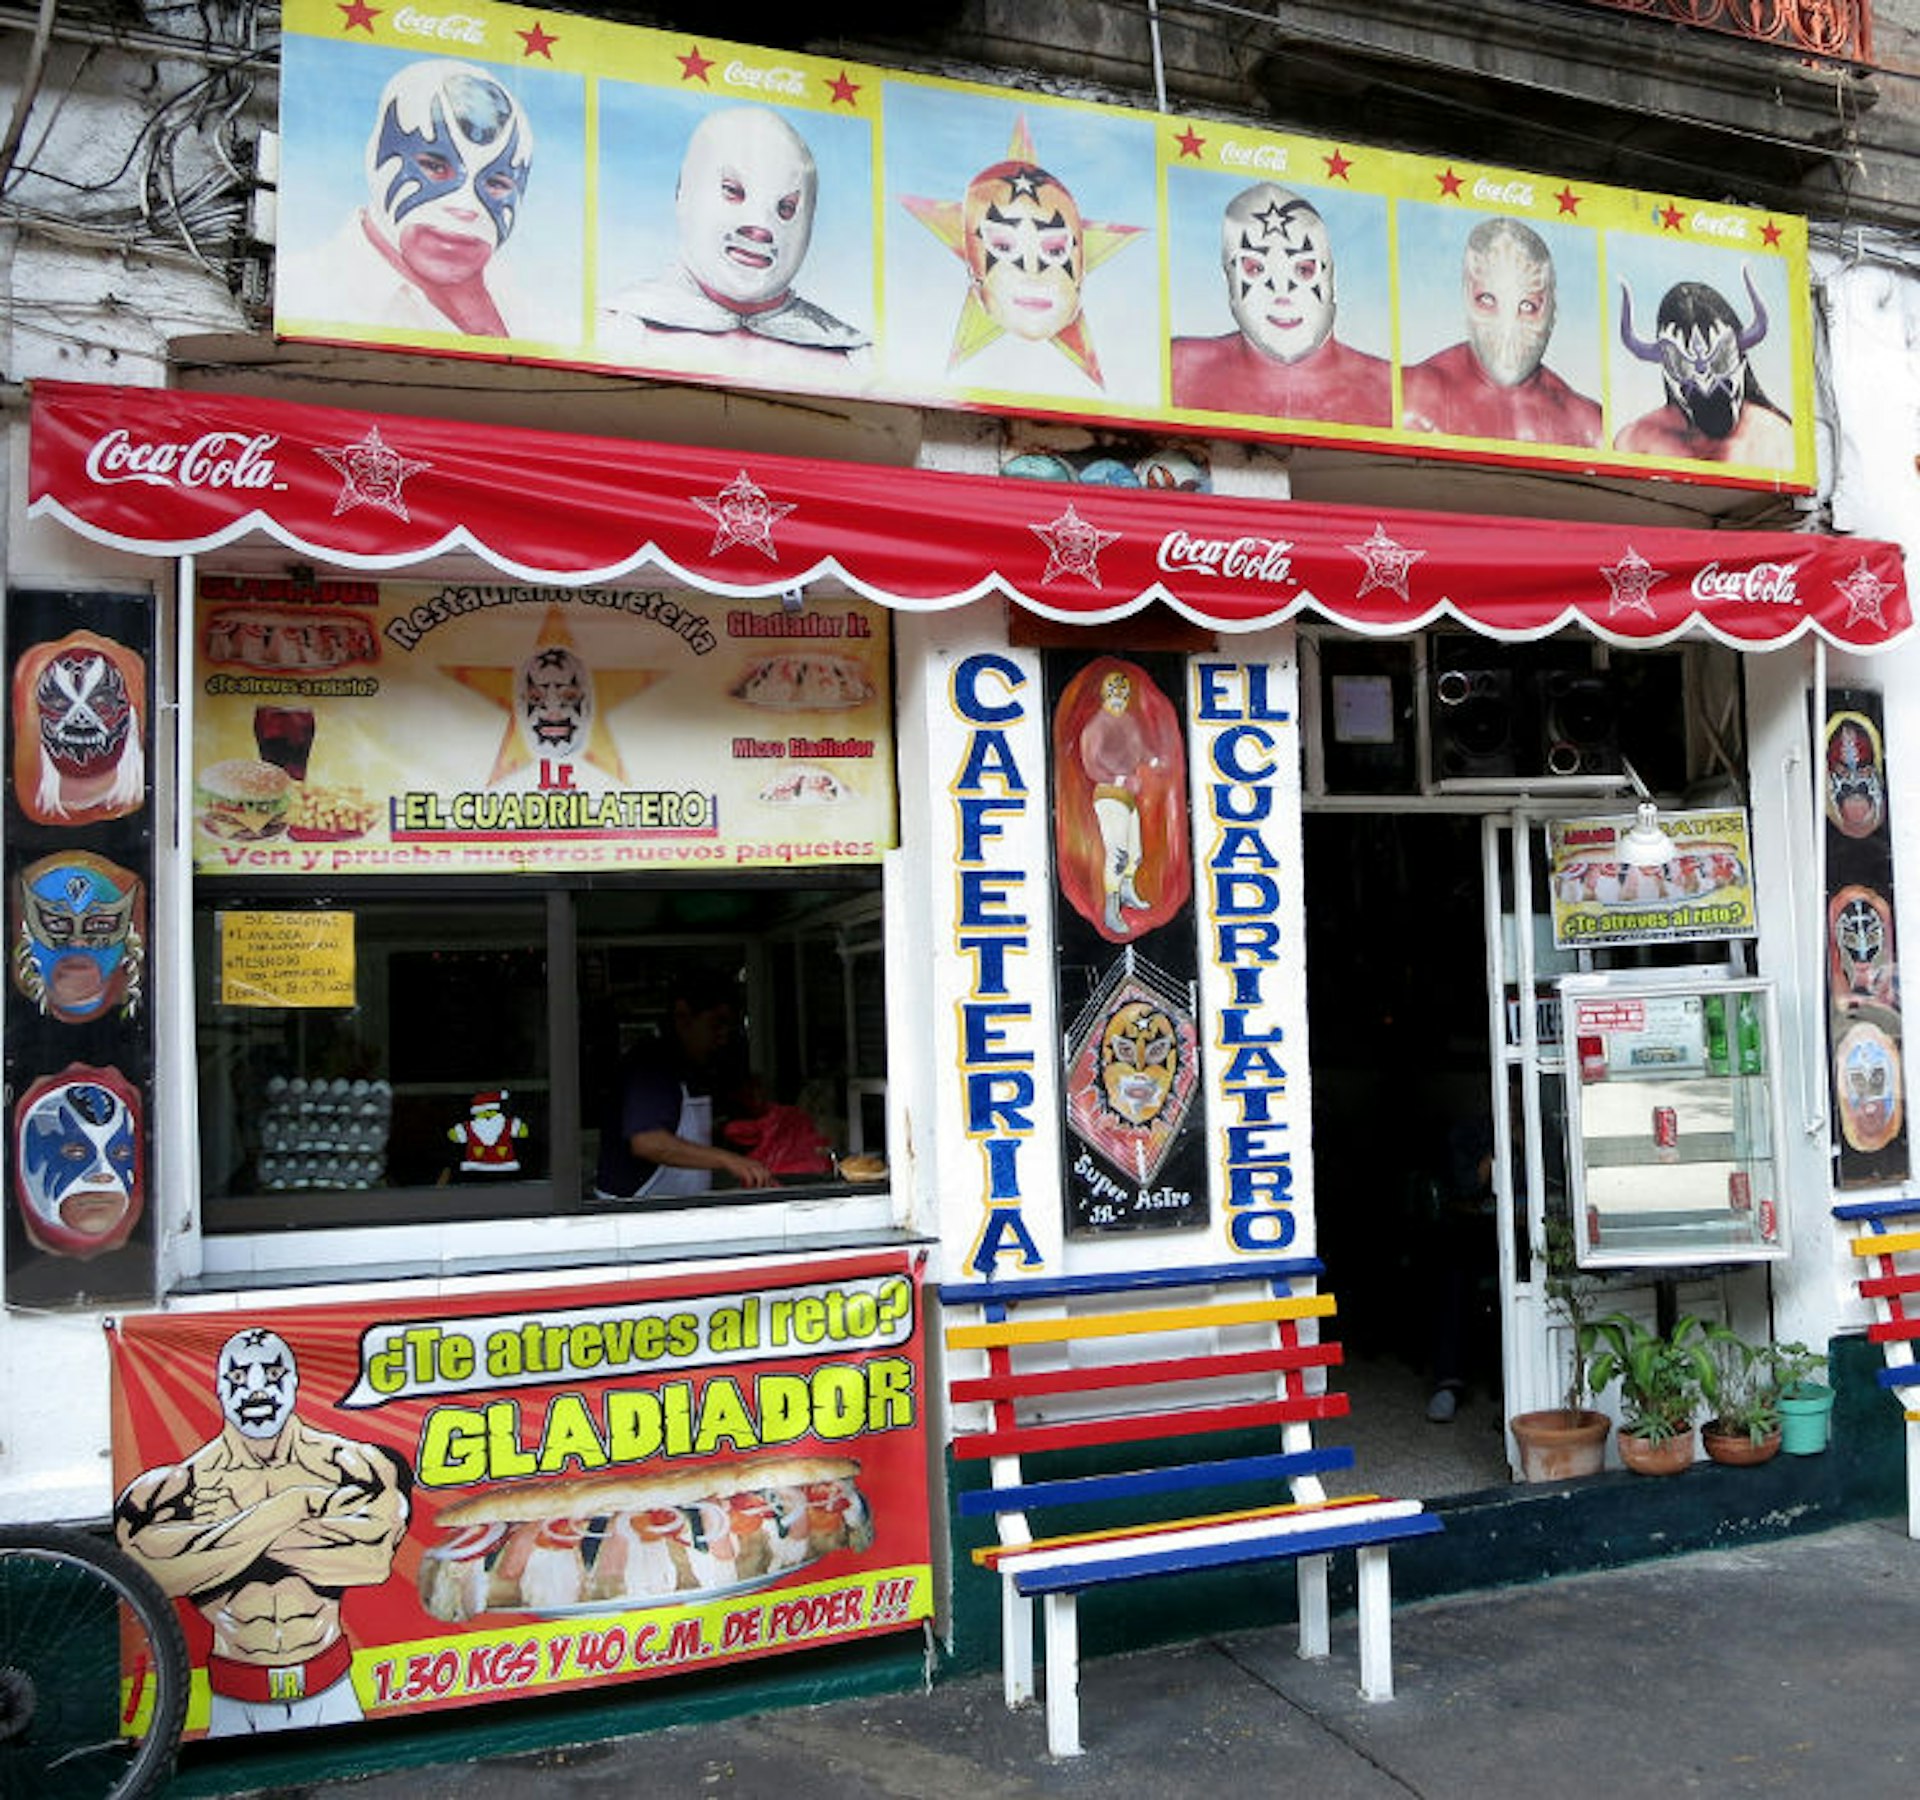 Take on an eating challenge at this shrine to wrestling. Image by John Hecht / Lonely Planet